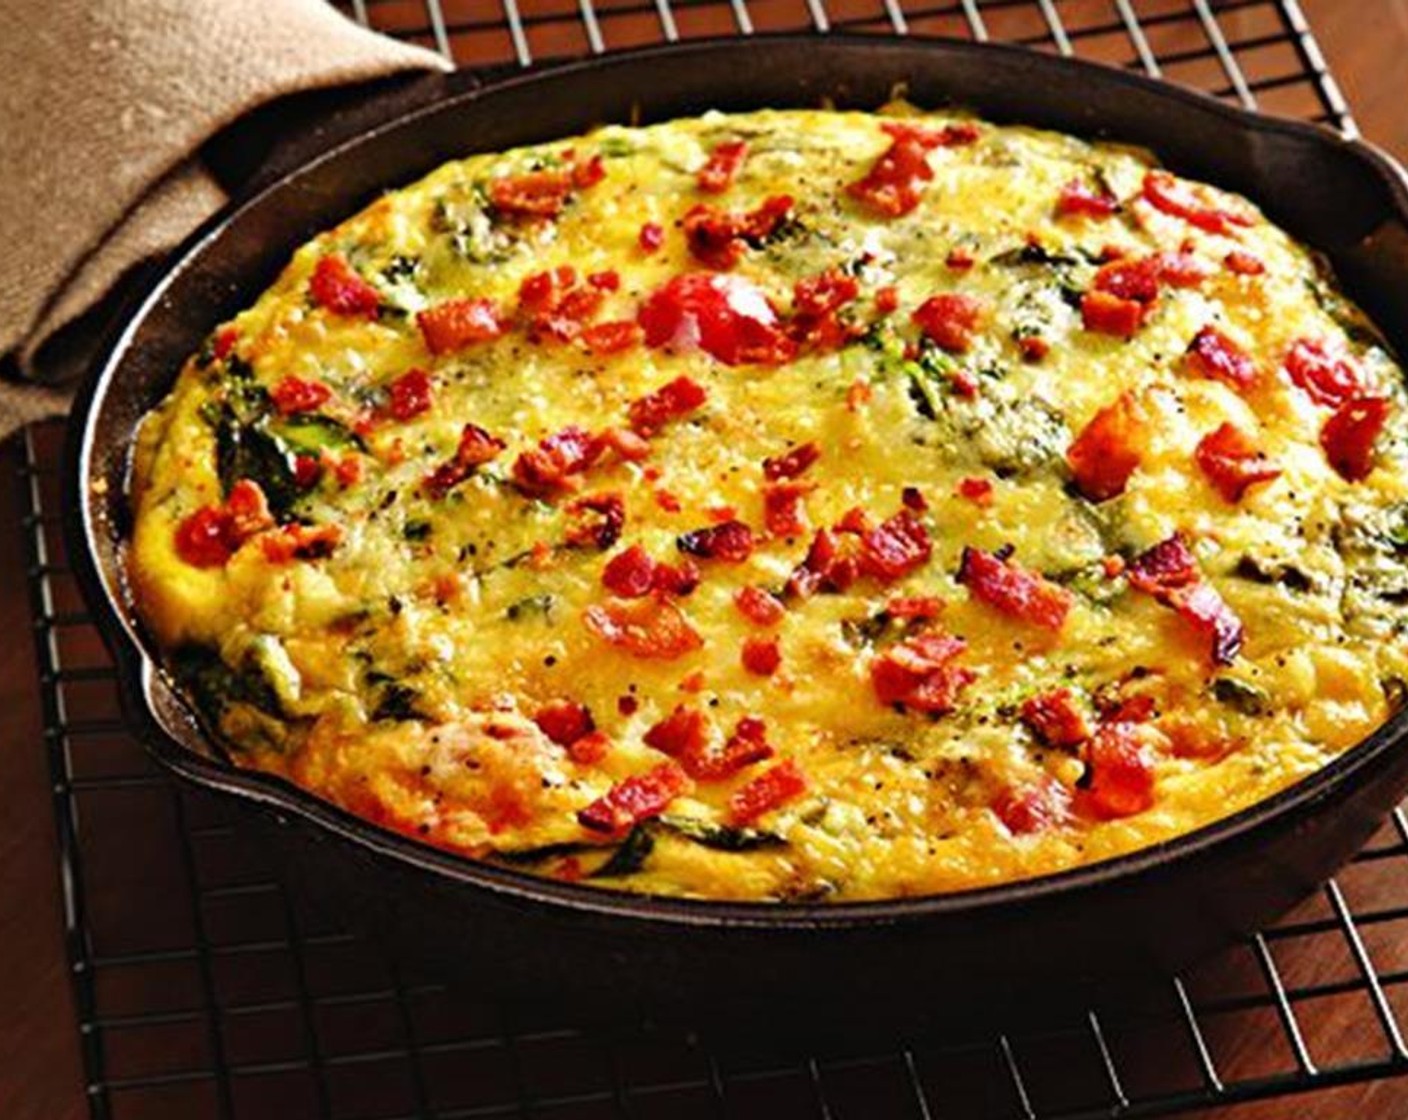 step 6 Bake the frittata until the center is set, 25 to 30 minutes. Let rest on top of the stove before cutting into wedges to serve.